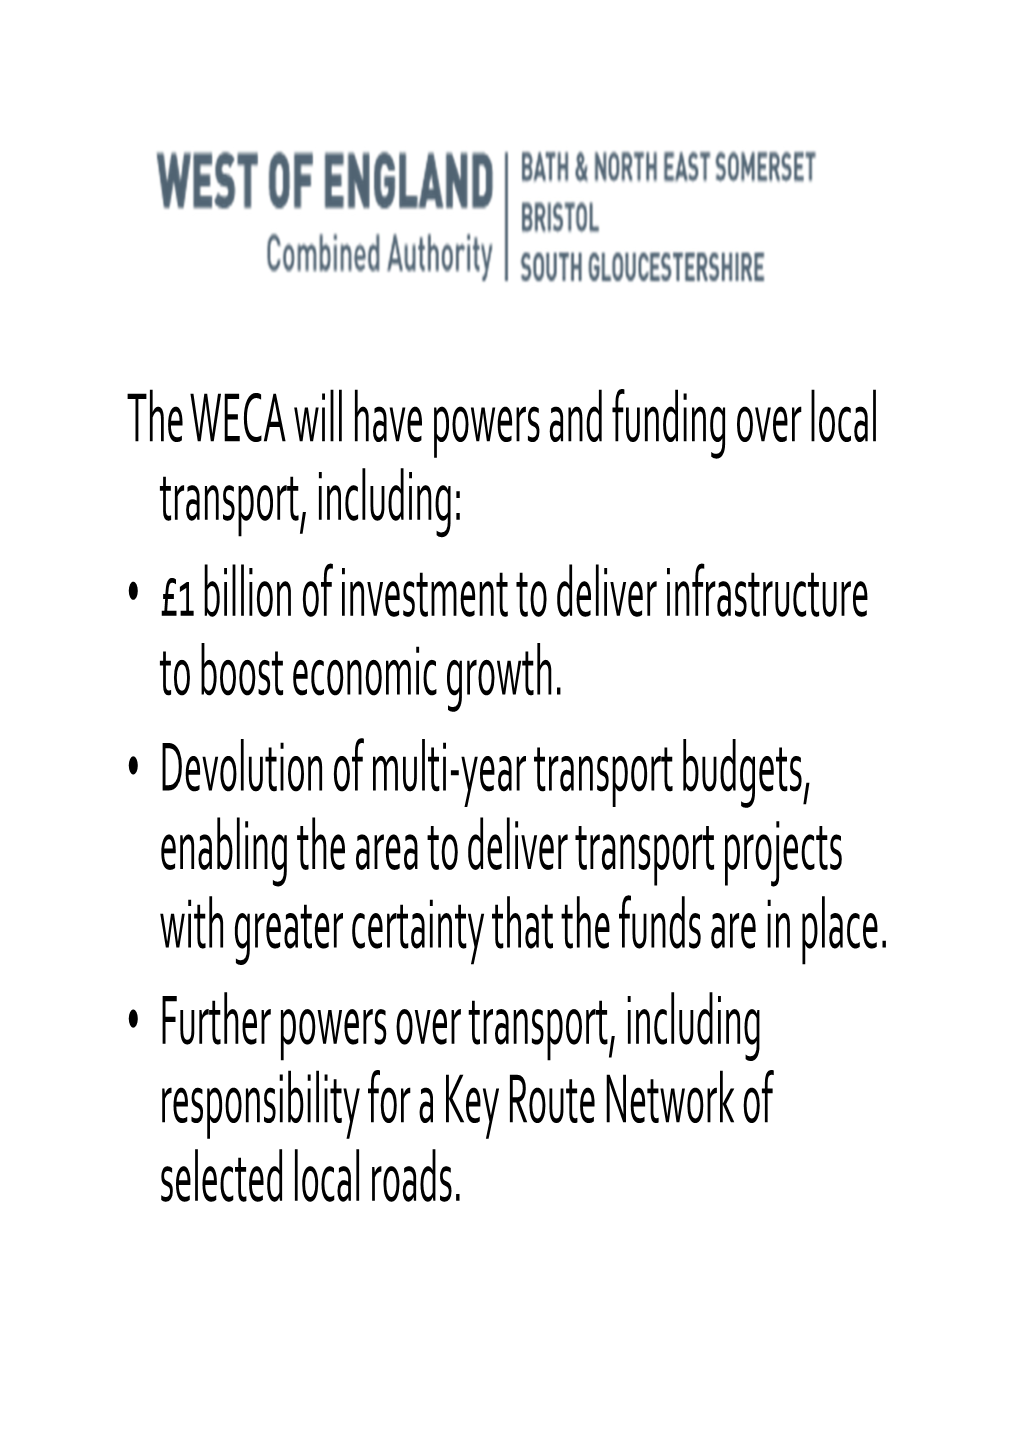 The WECA Will Have Powers and Funding Over Local Transport, Including: • £1 Billion of Investment to Deliver Infrastructure to Boost Economic Growth